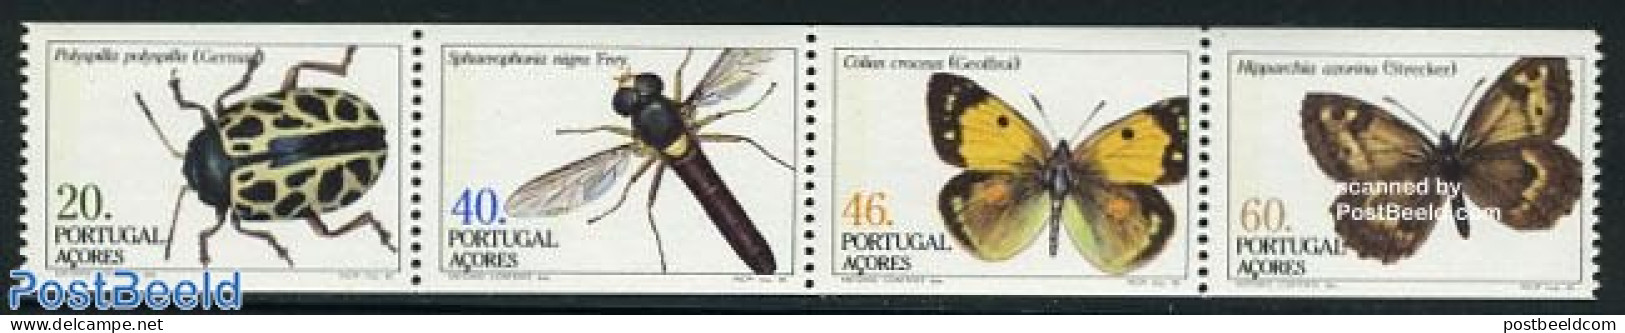 Azores 1985 Insects From Booklet 4v, Mint NH, Nature - Butterflies - Insects - Açores